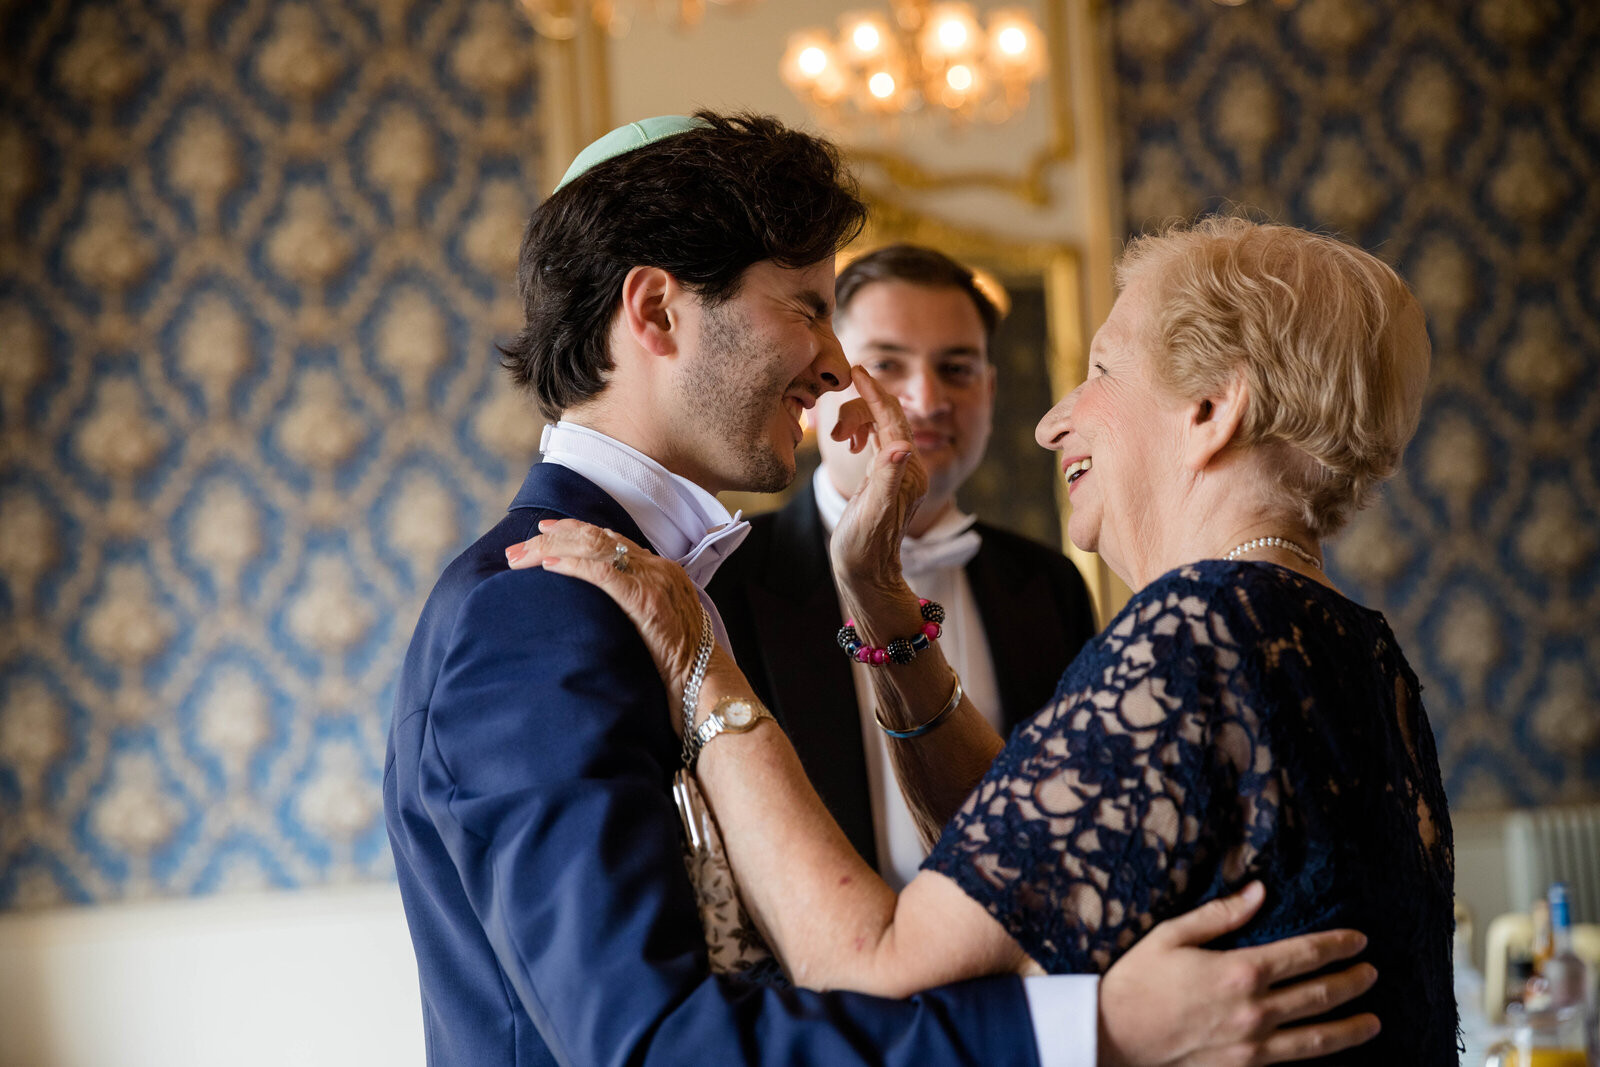 The Groom and his grandmother